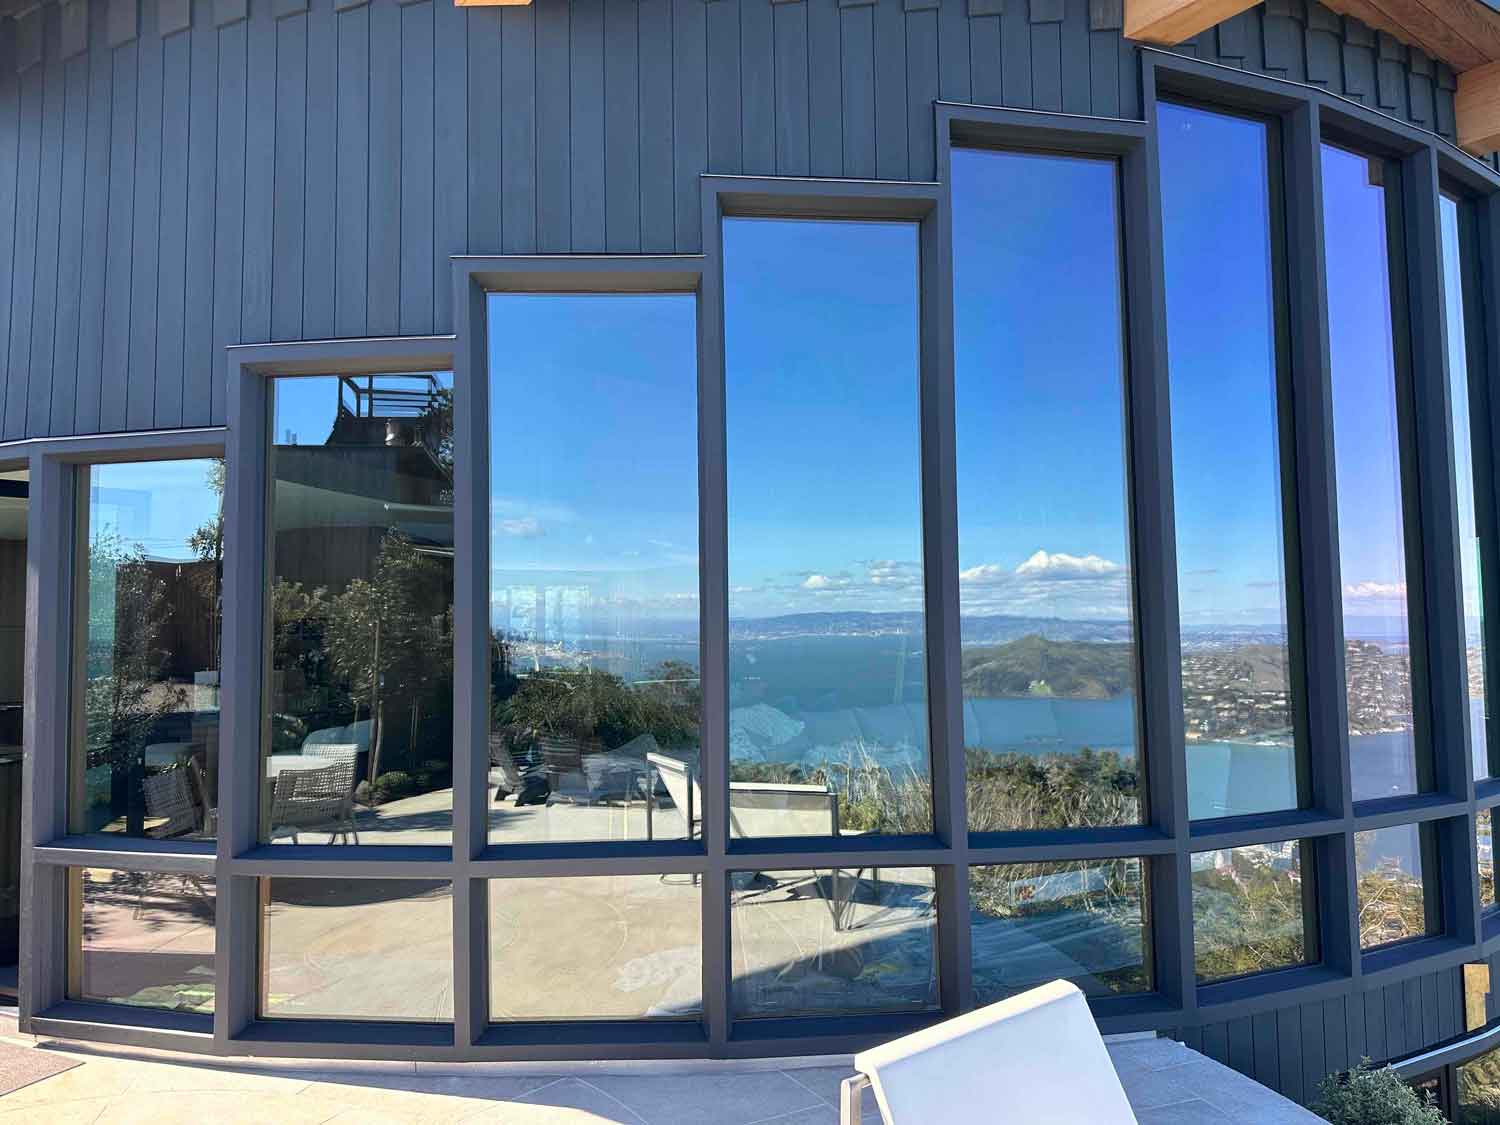 ClimatePro installs 3M Prestige Window Film on the windows of this home in Sausalito, CA. Now available all over the San Francisco Bay Area. Free Estimates.